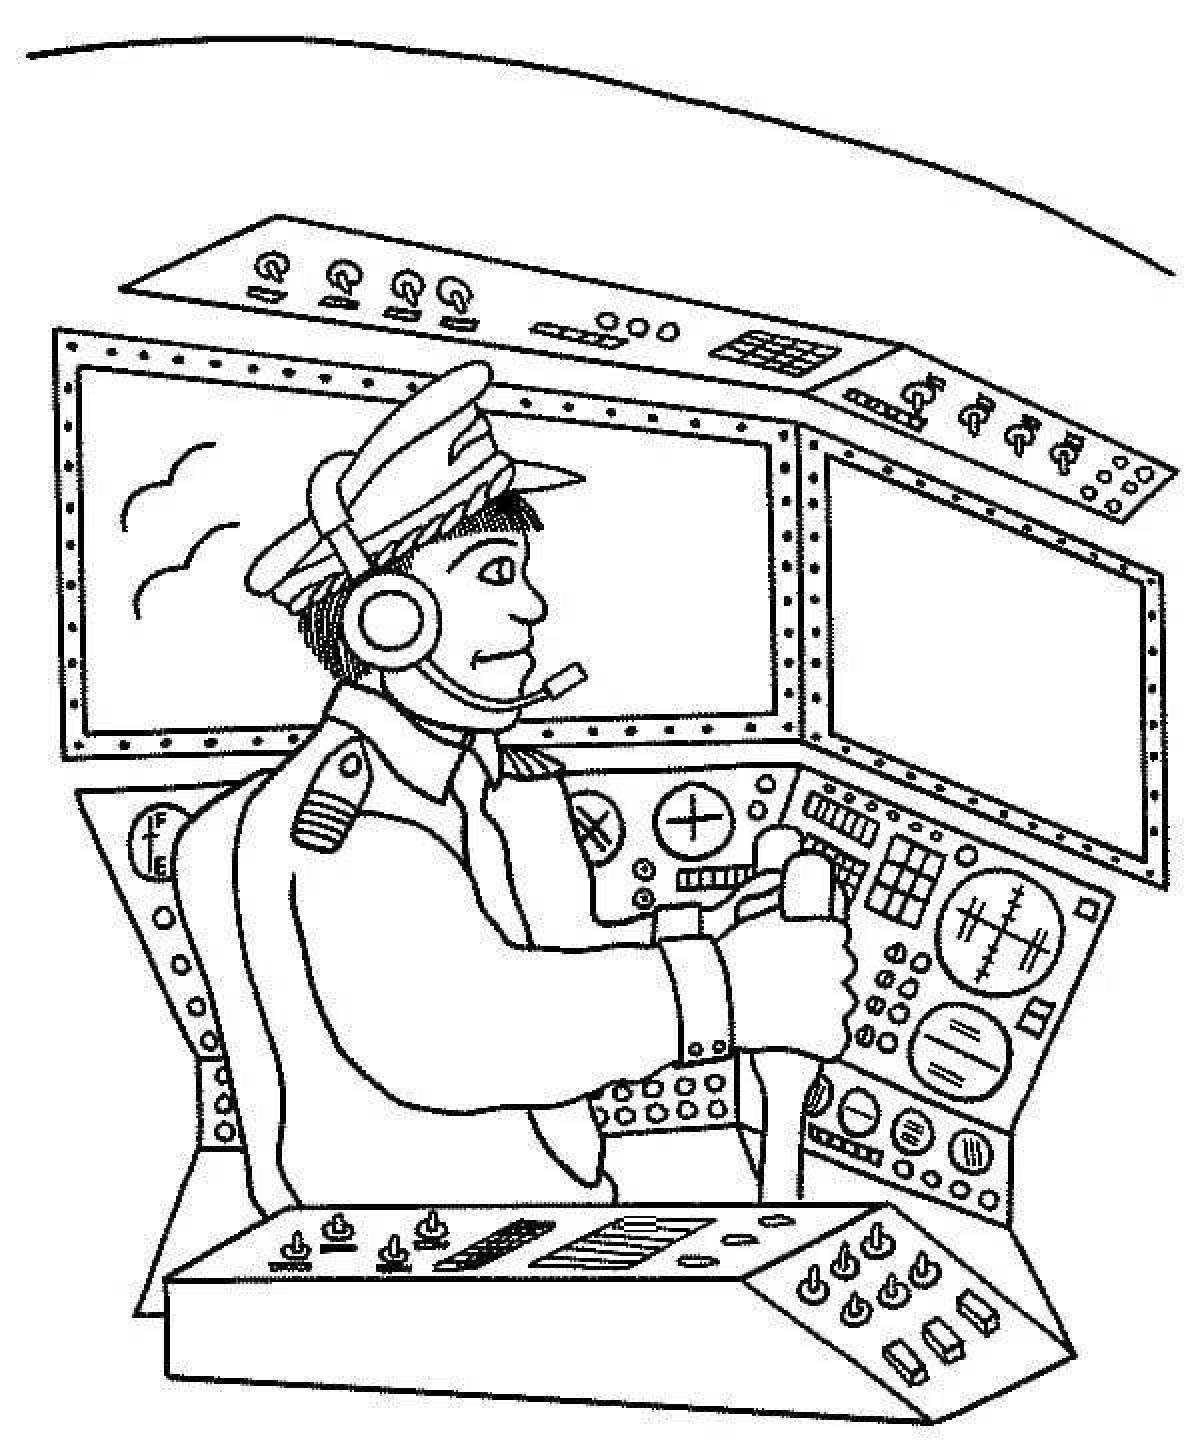 Adorable pilot coloring page for kids